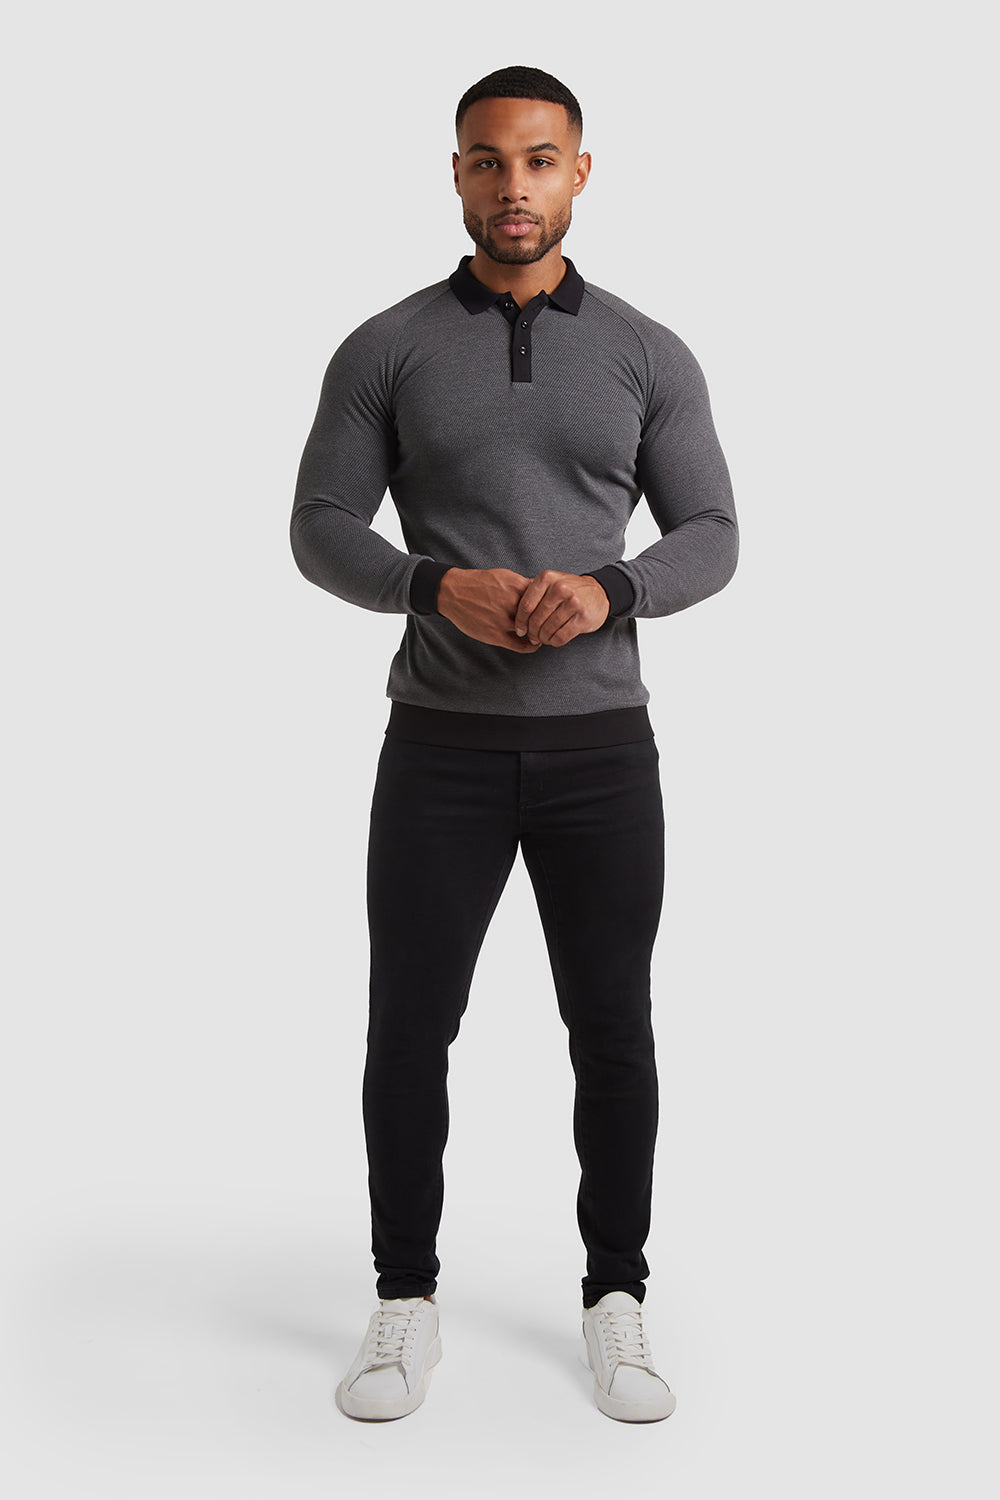 Knit Look Polo (LS) in Charcoal - TAILORED ATHLETE - ROW